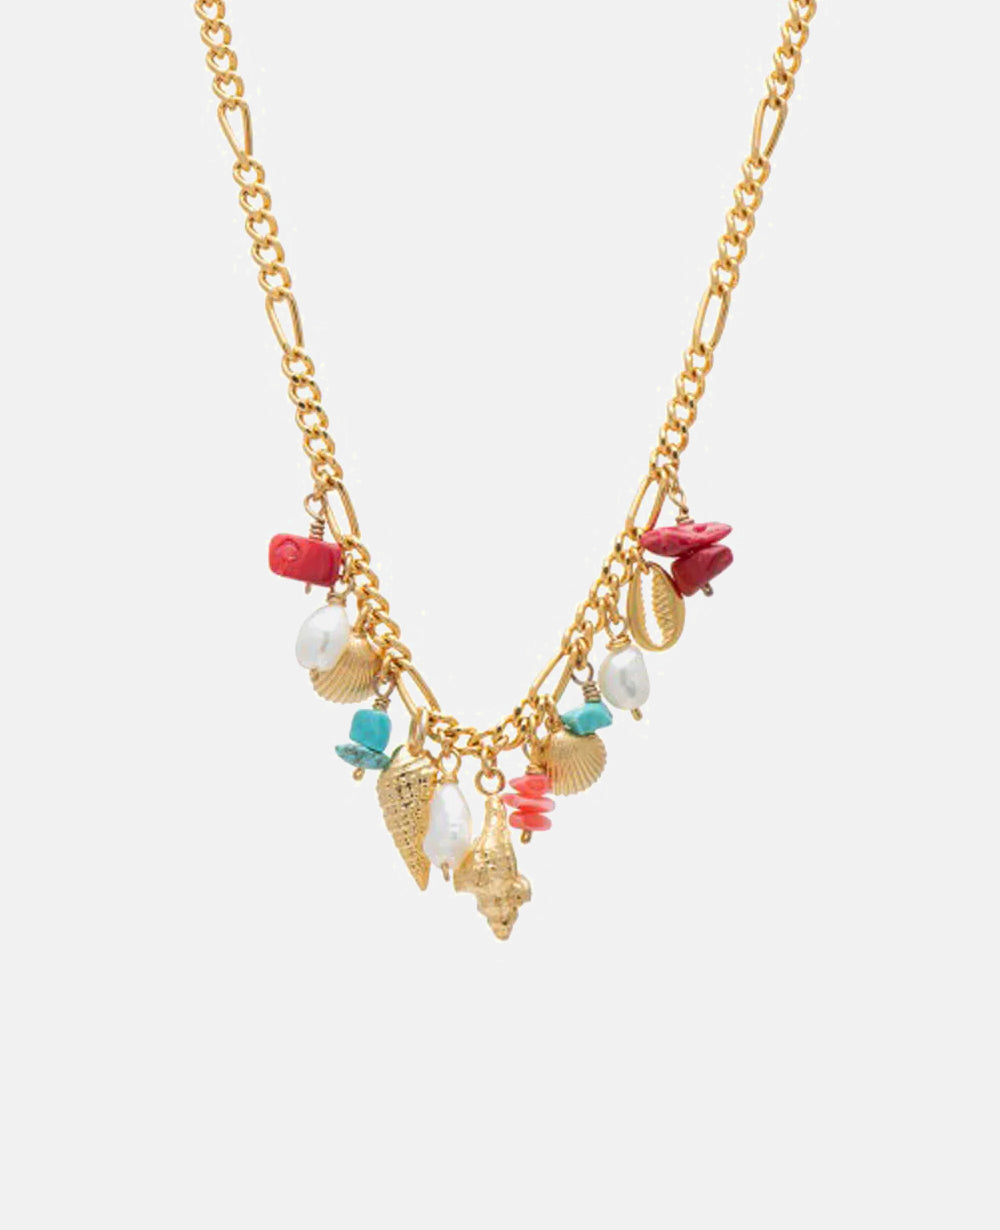 "SUMMER VIBES" NECKLACE